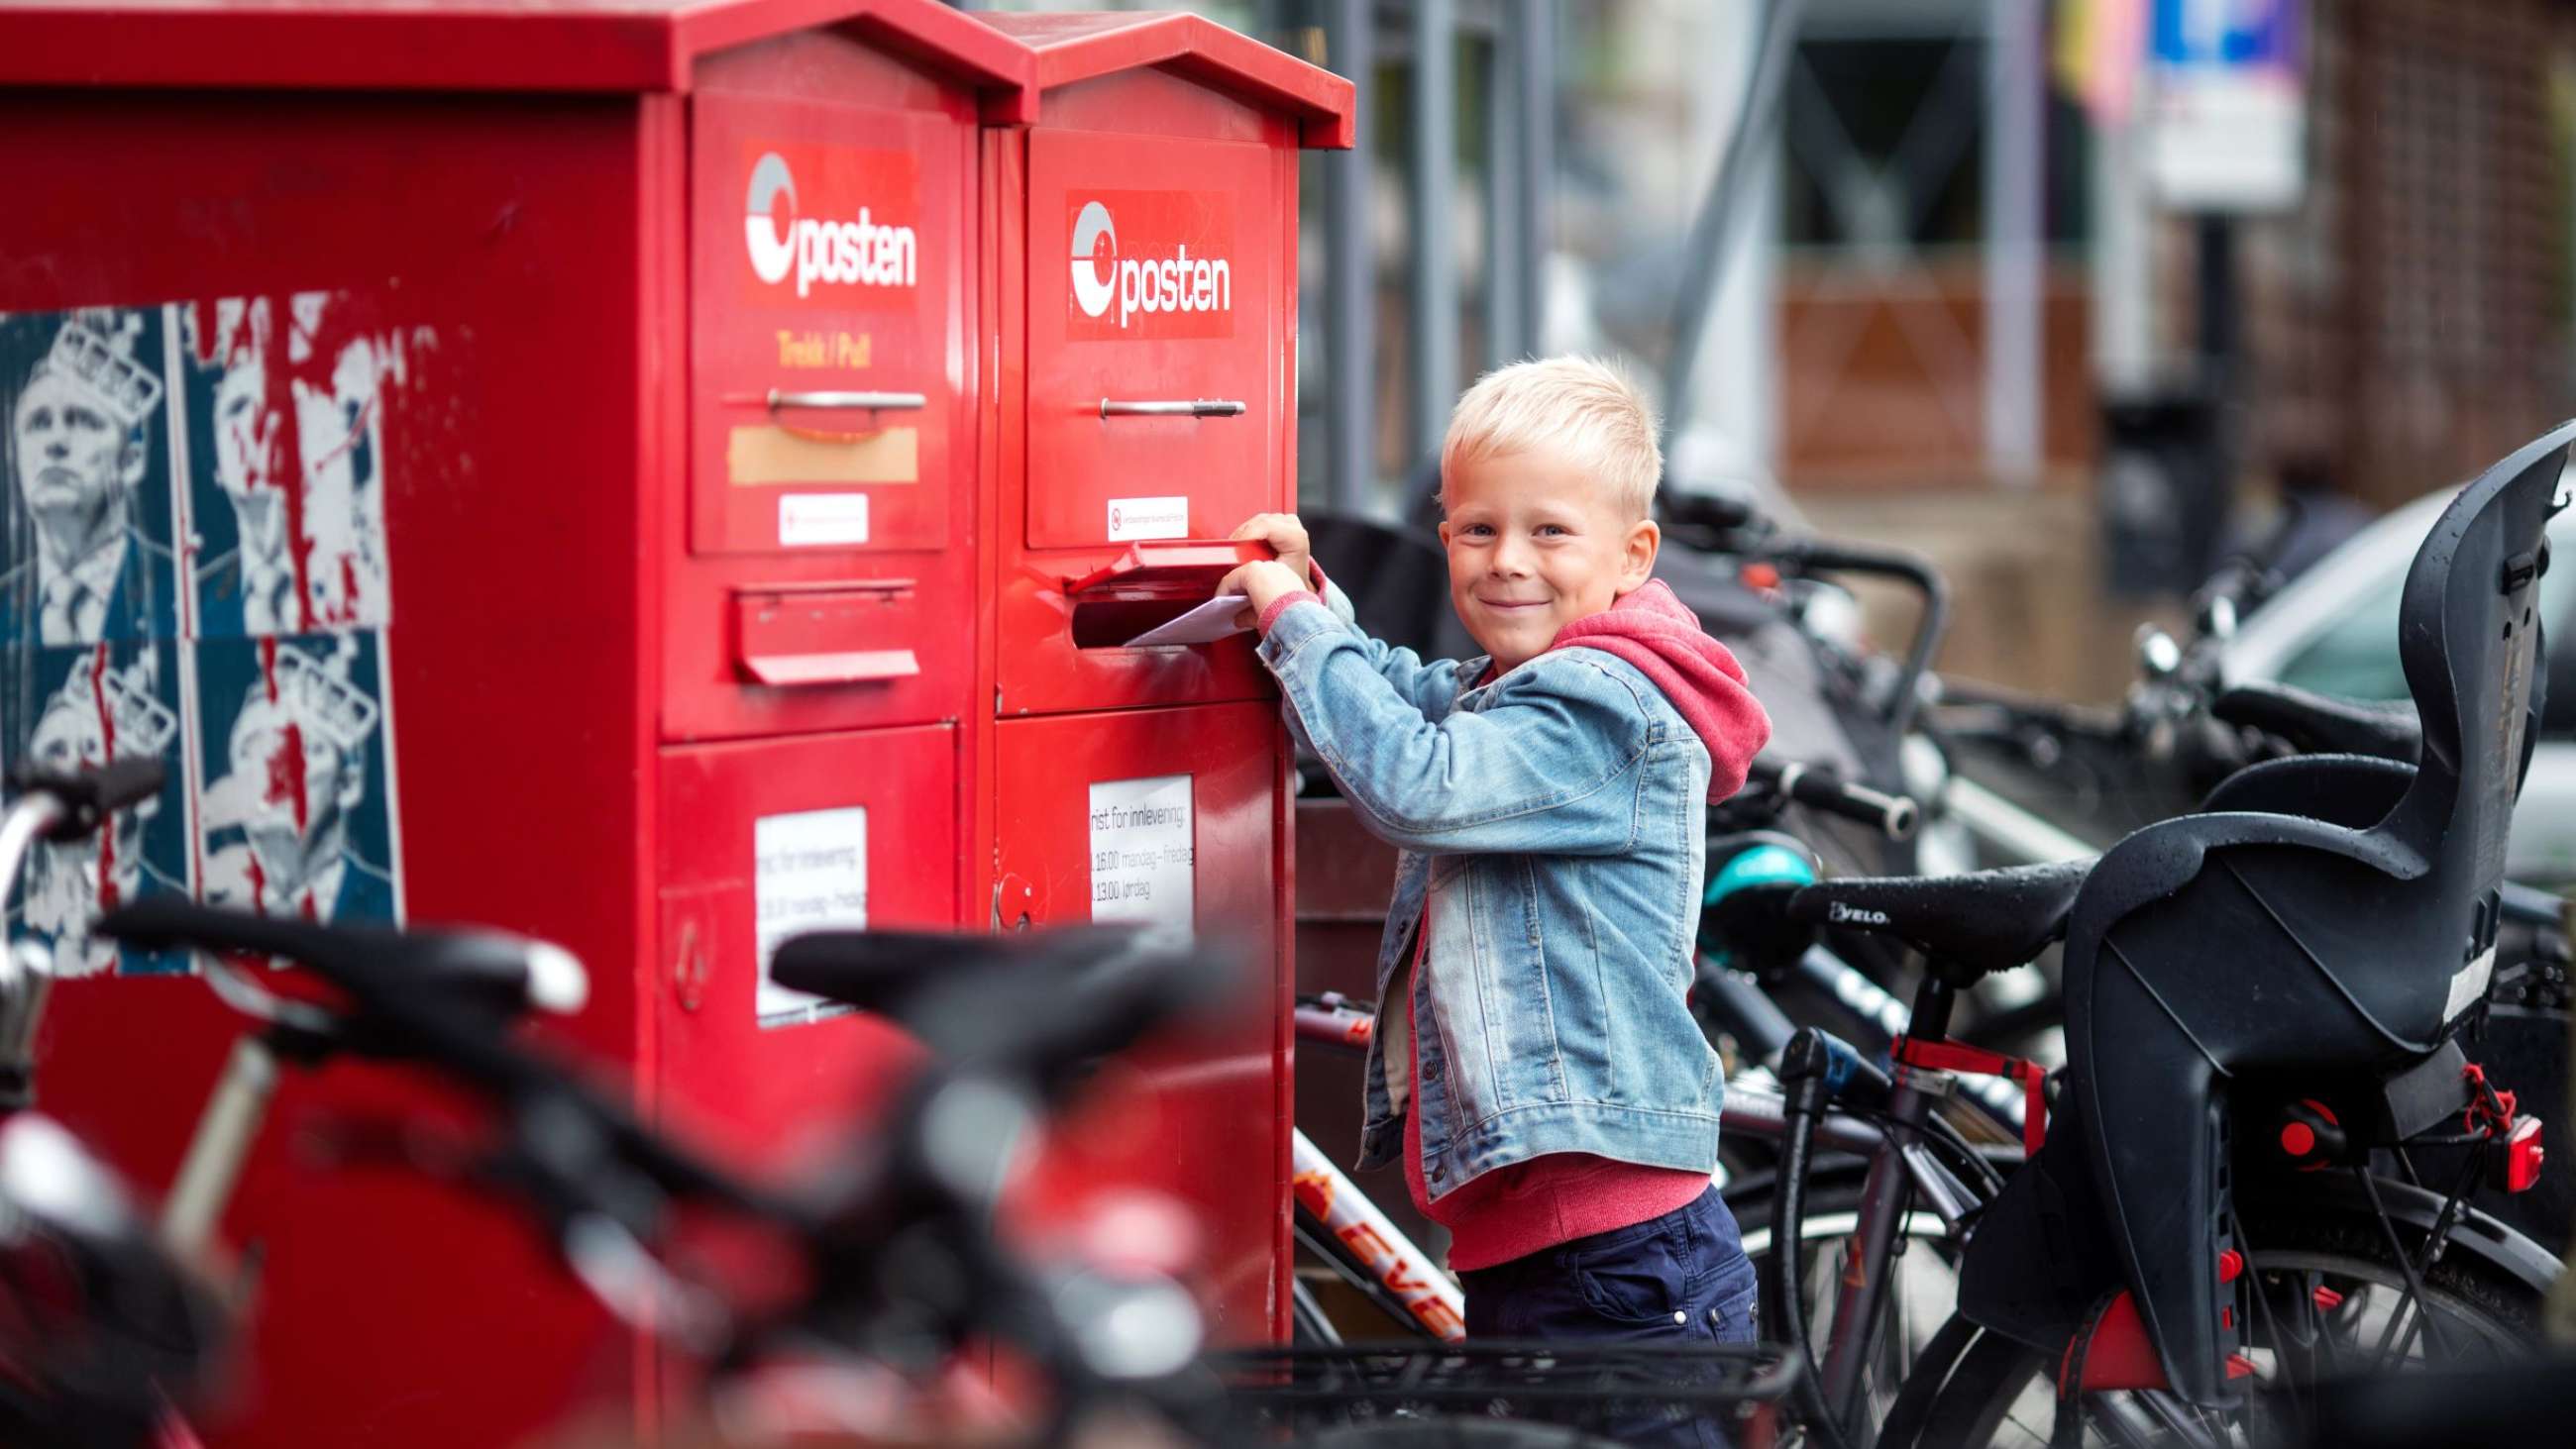 Boy putting a letter into a red postbox